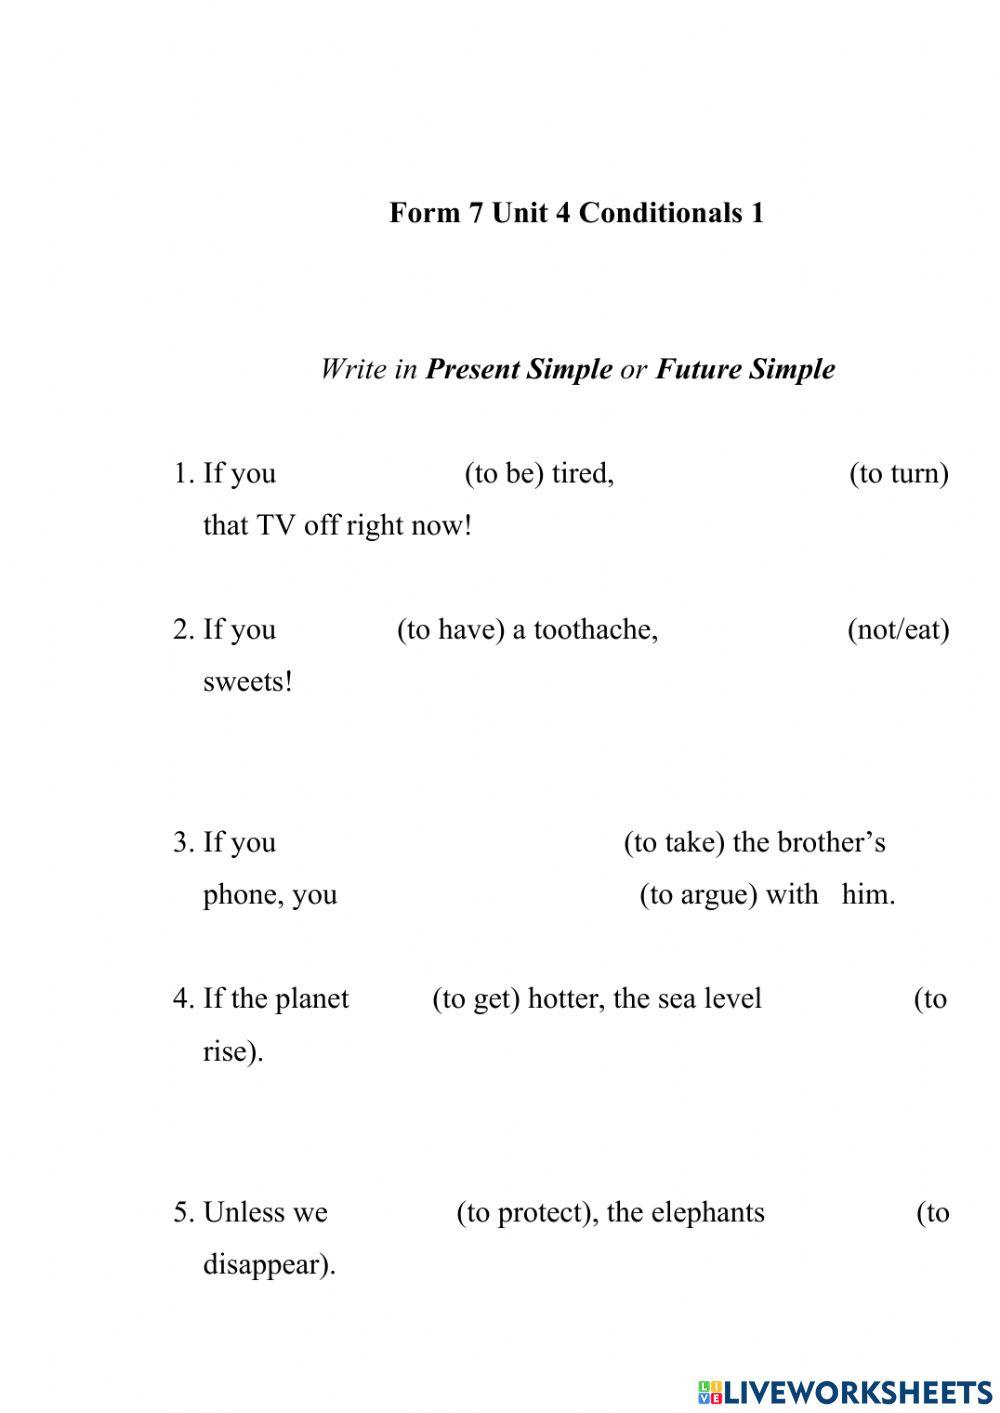 Form 7 Test 4b Conditionals 1